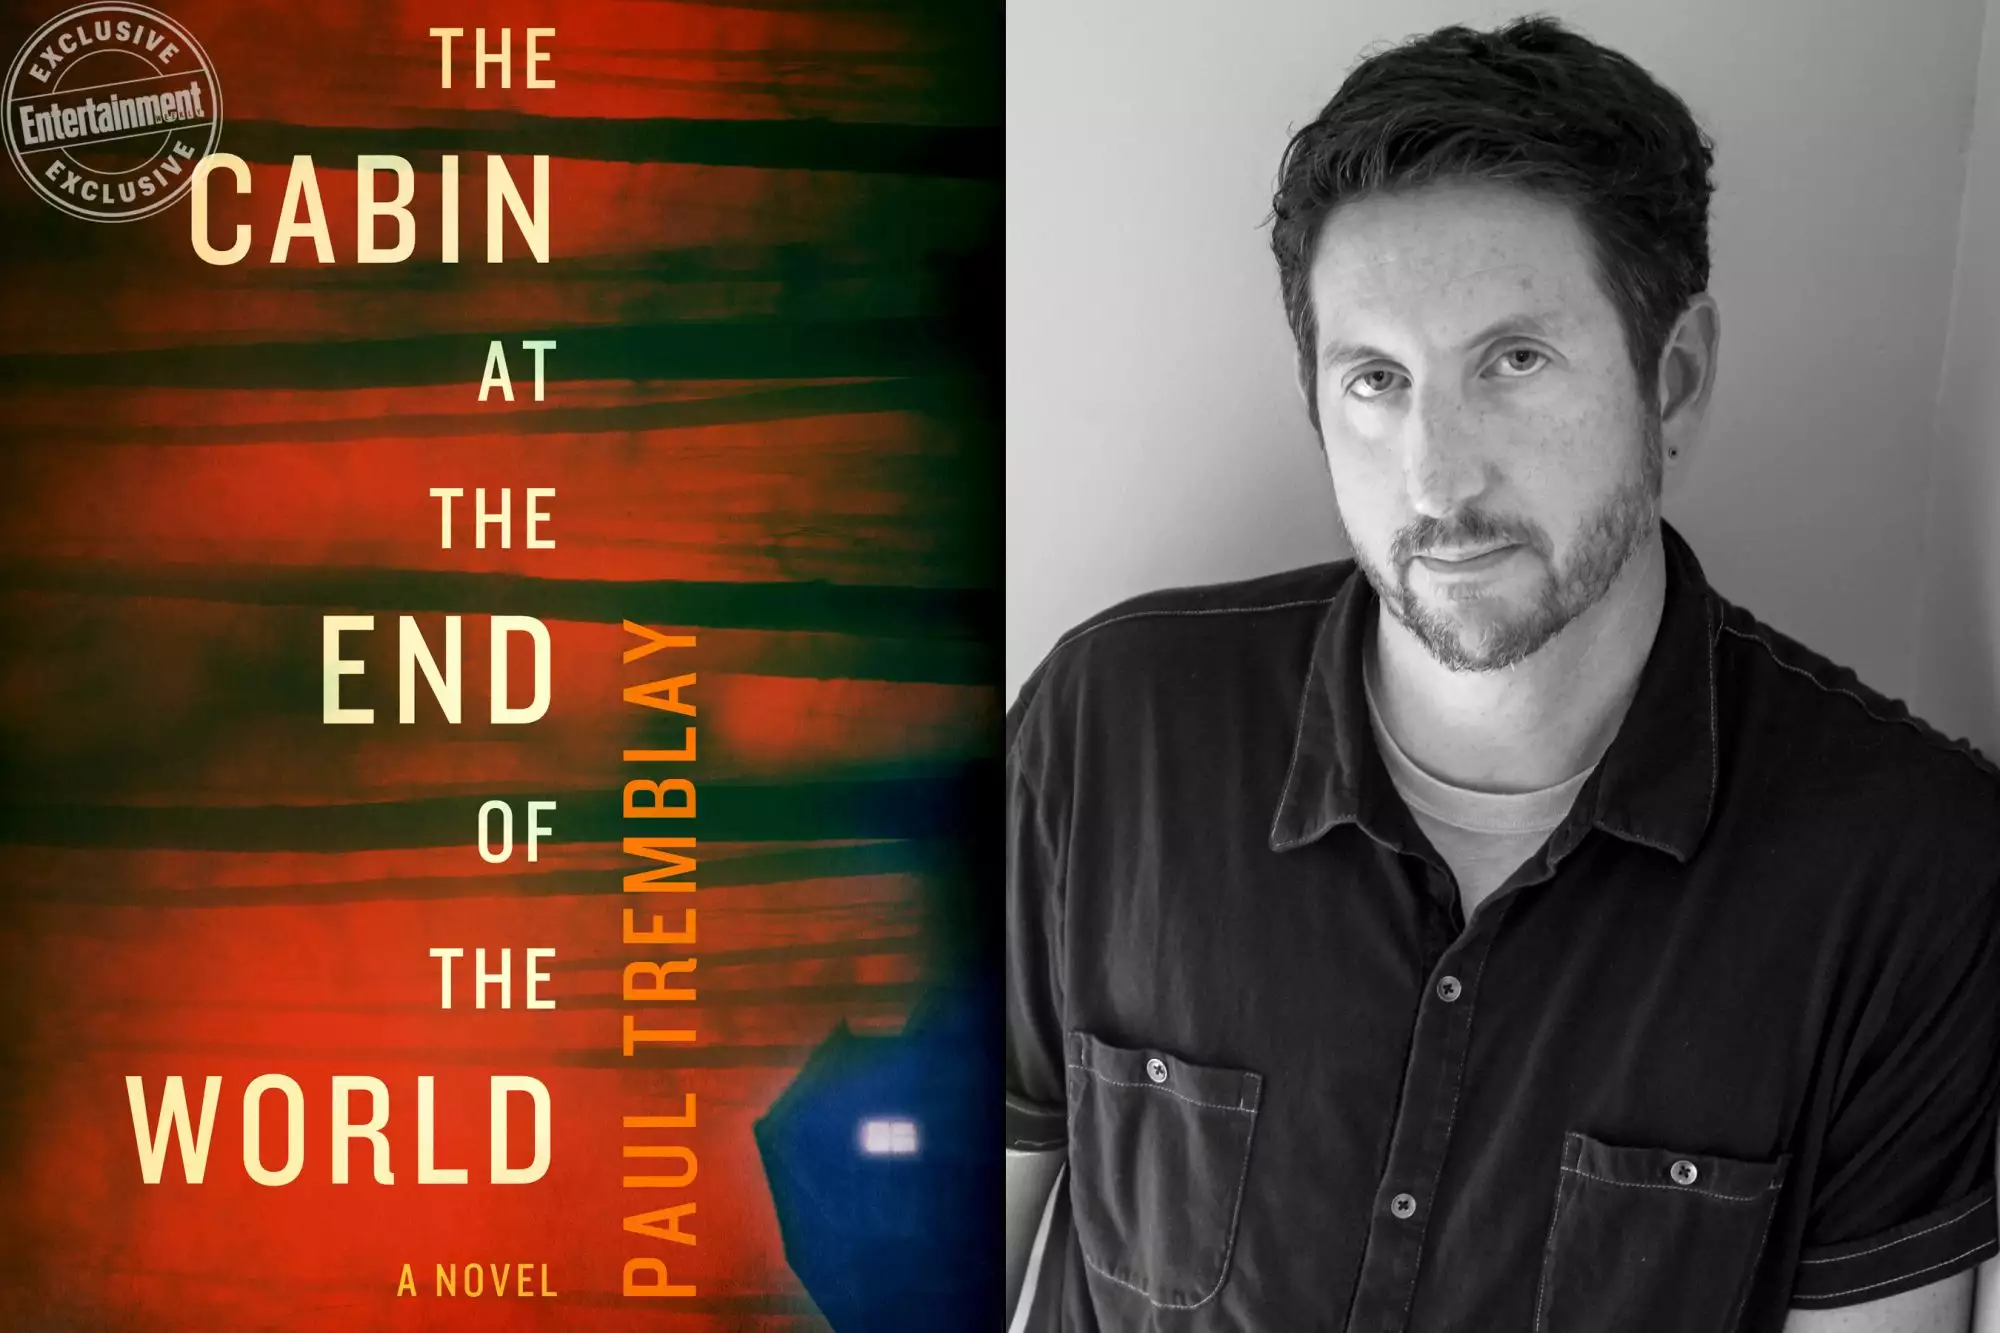 The Cabin at the End of the World Book and Paul Tremblay